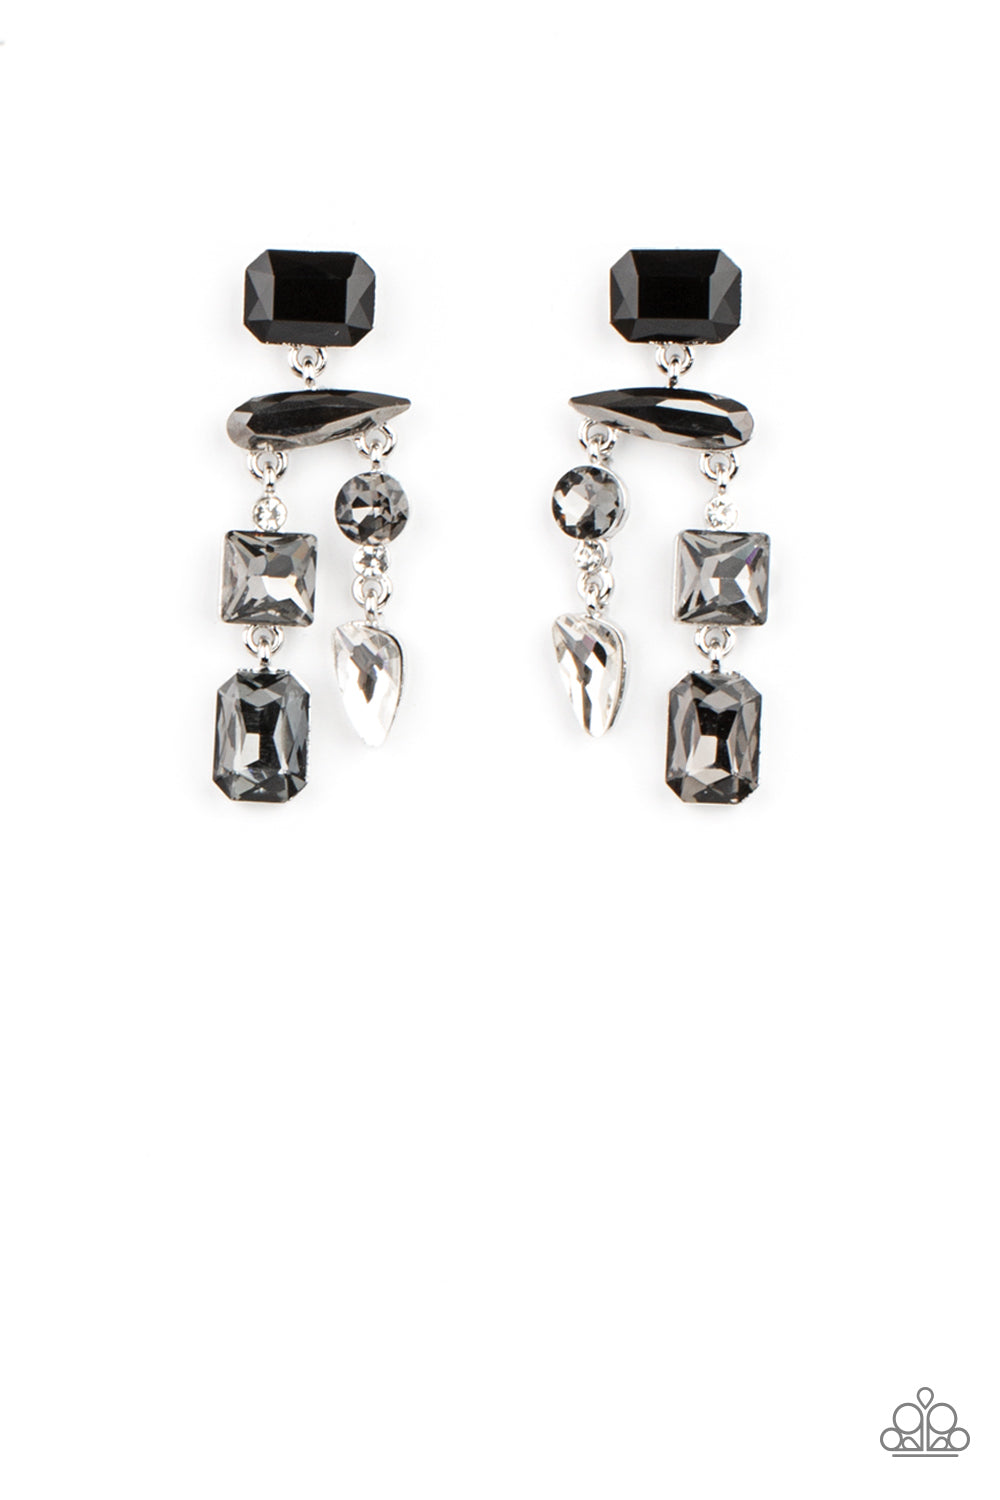 Paparazzi Hazard Pay - Silver Earrings - A Finishing Touch Jewelry